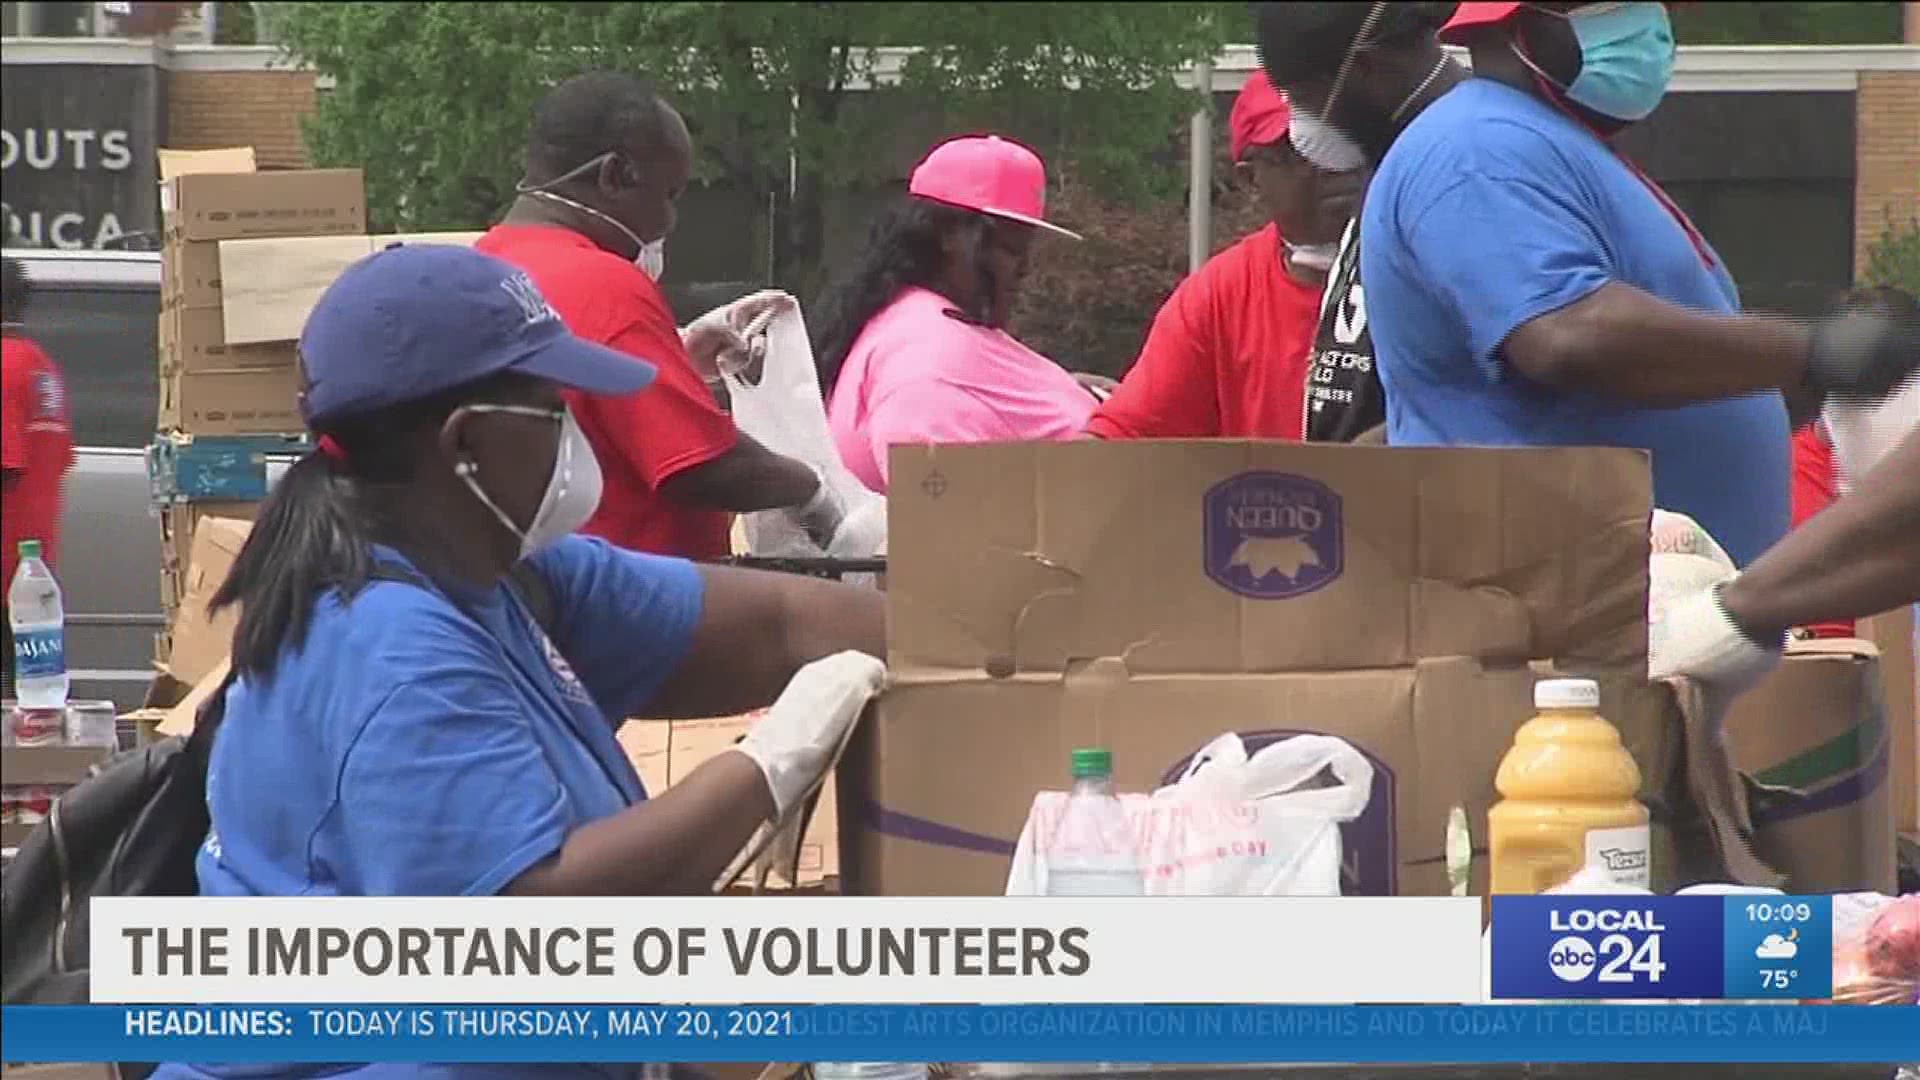 Thousands have volunteered to help others through the pandemic.